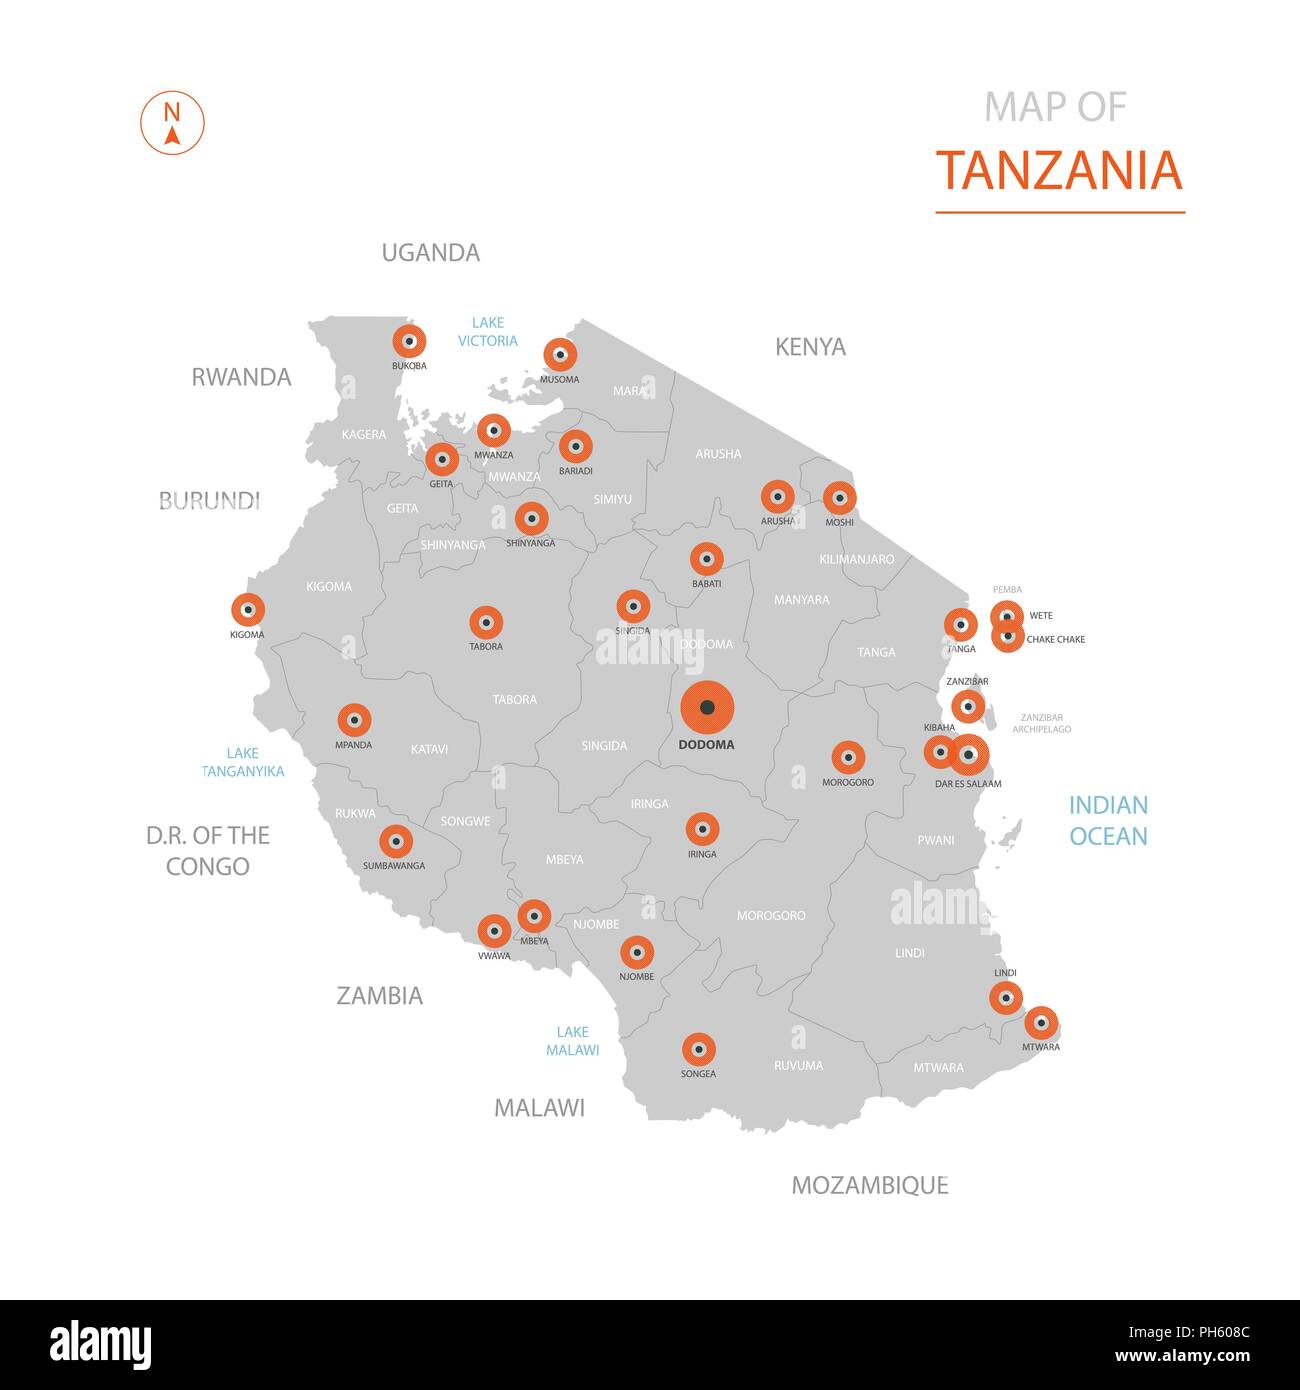 Stylized vector Tanzania map showing big cities, capital Dodoma, administrative divisions. Stock Vector